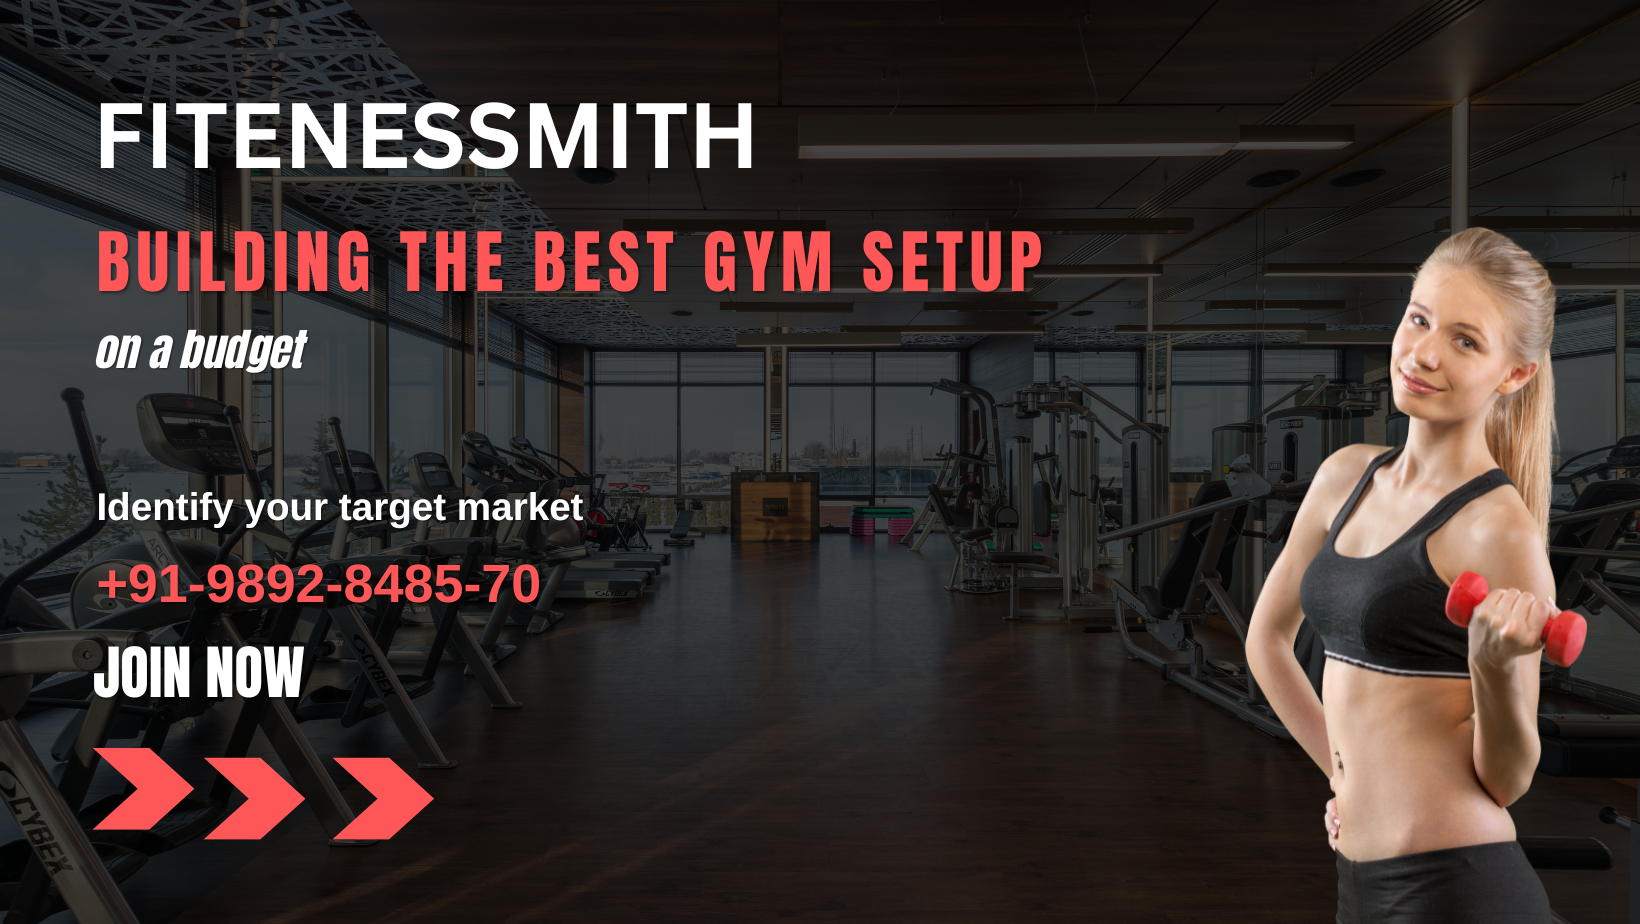 Make money by building the best gym setup